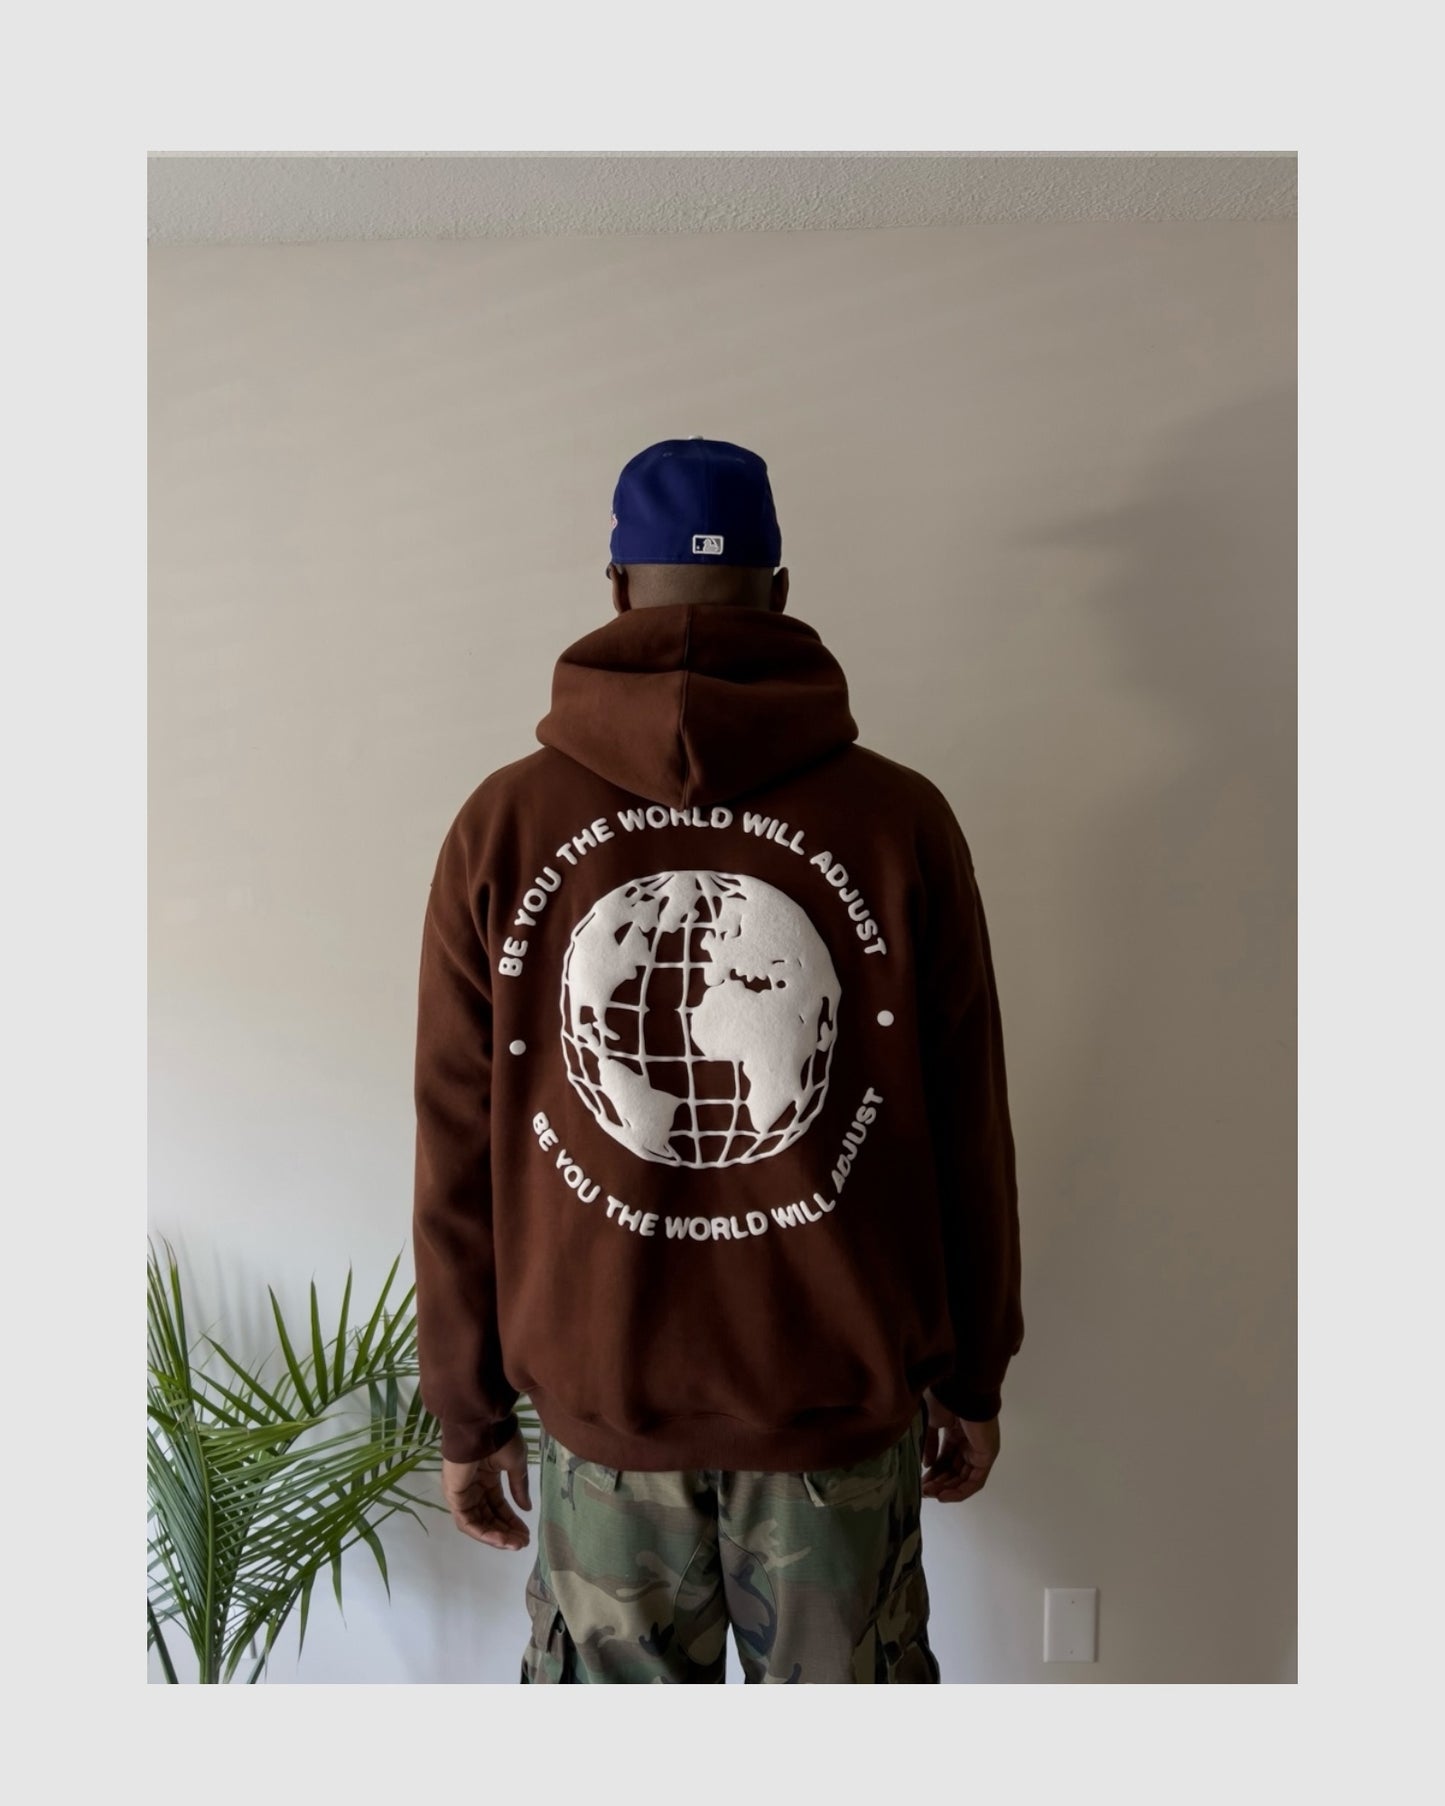 Classic Be You Hoodie (Brown)